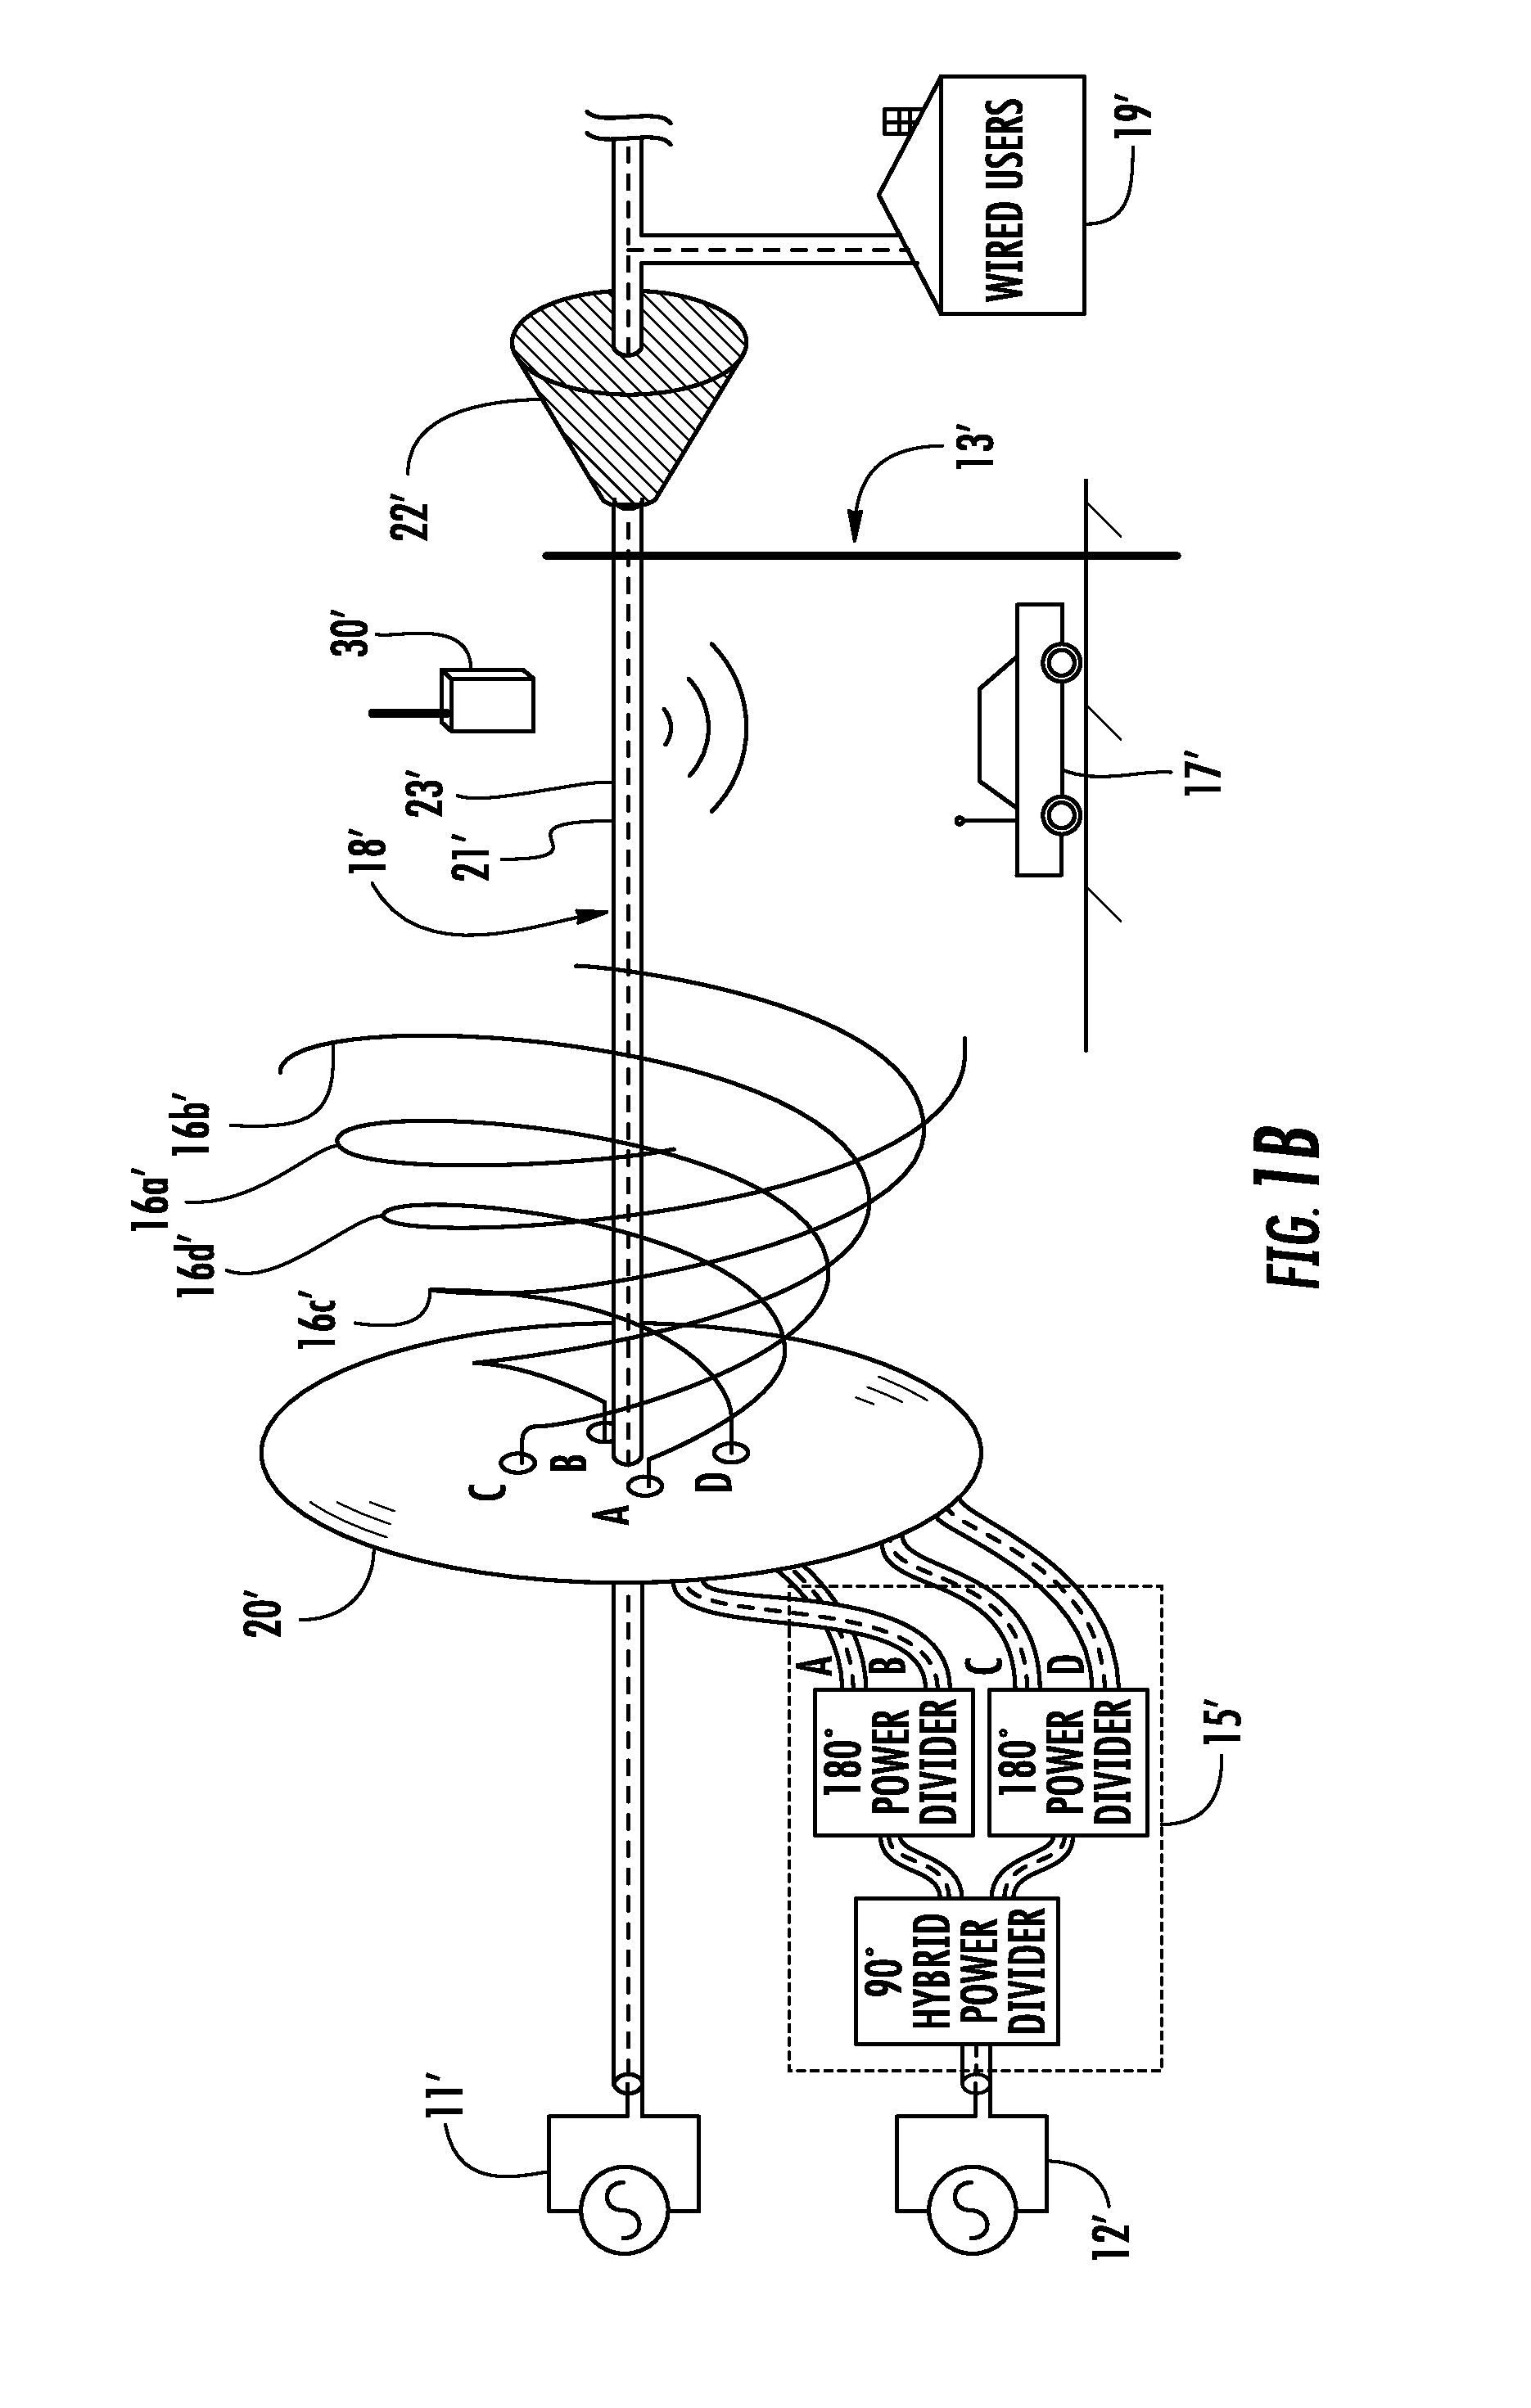 Microcellular communications antenna and associated methods